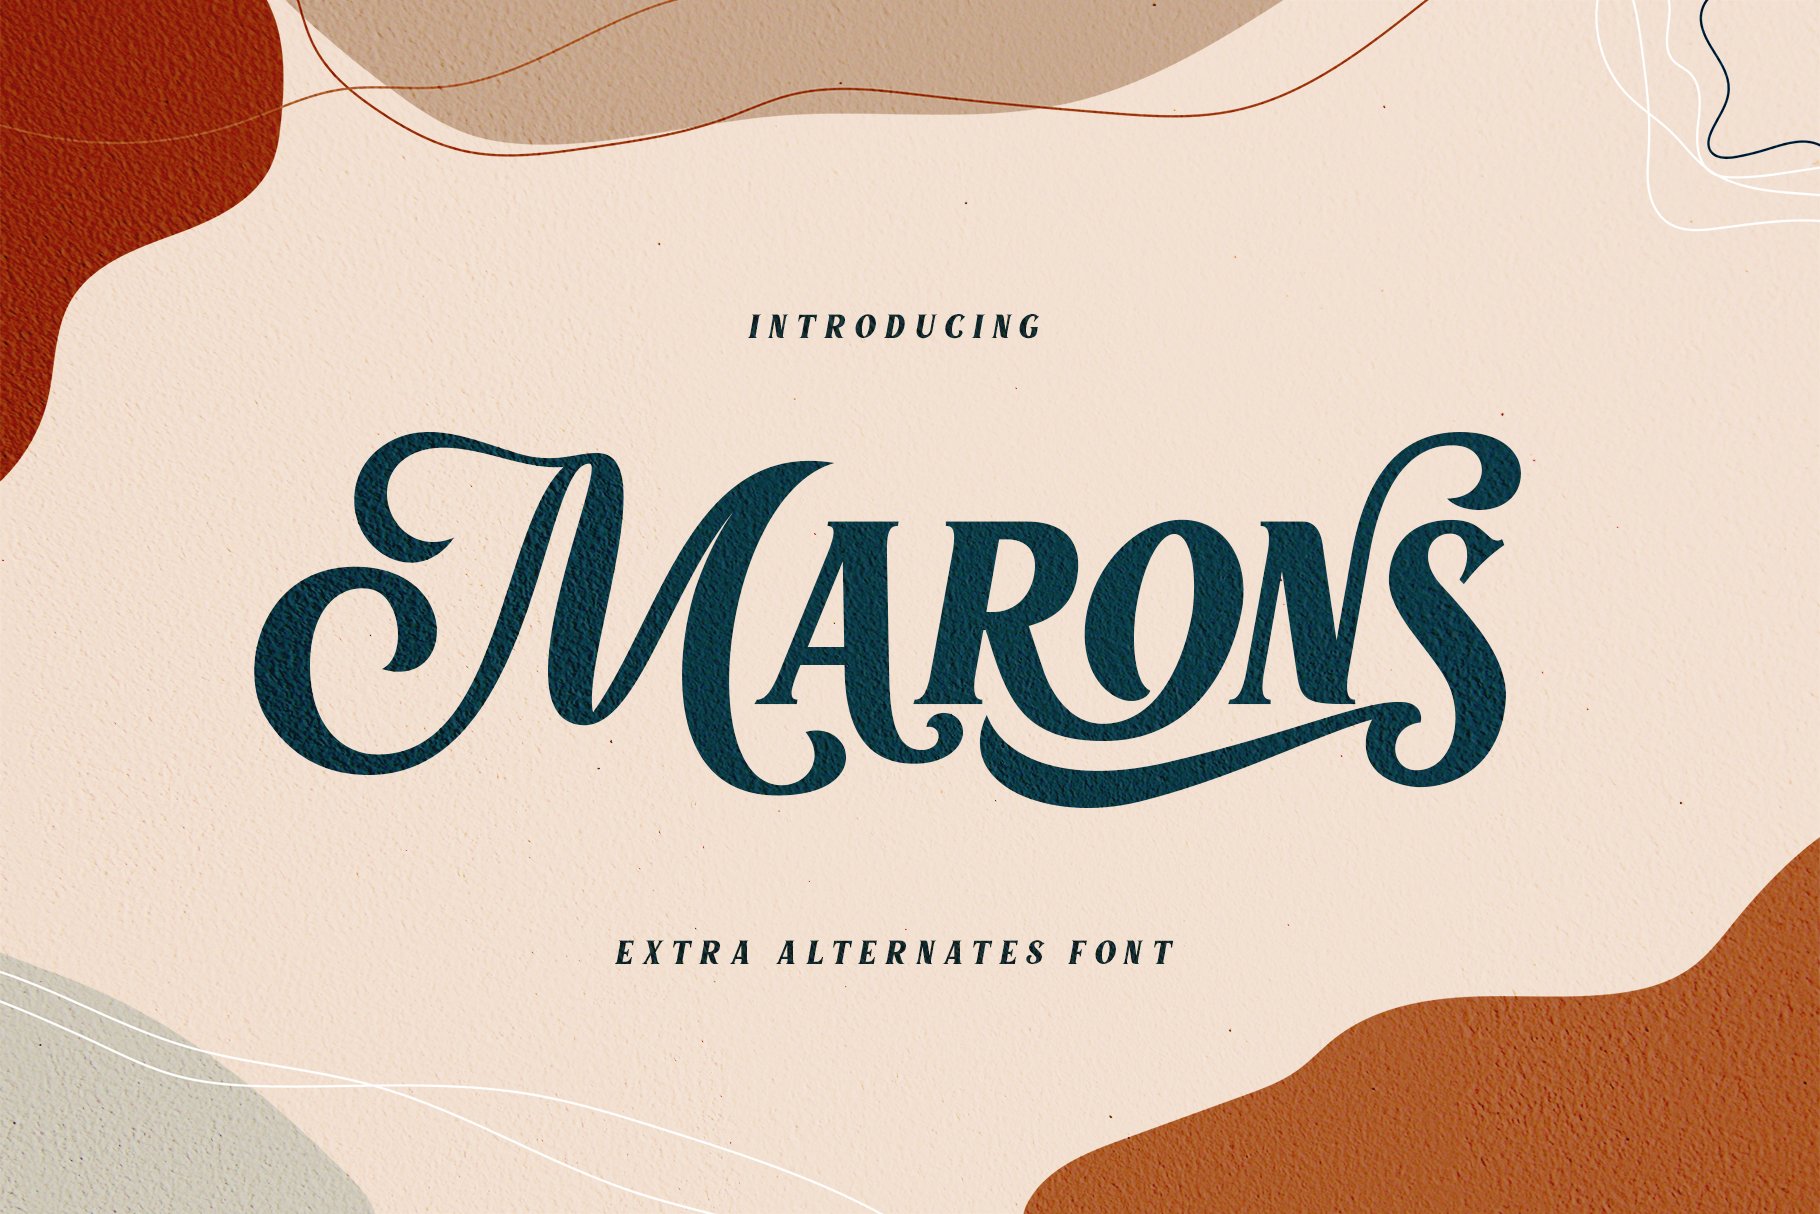 Marons font cover image.